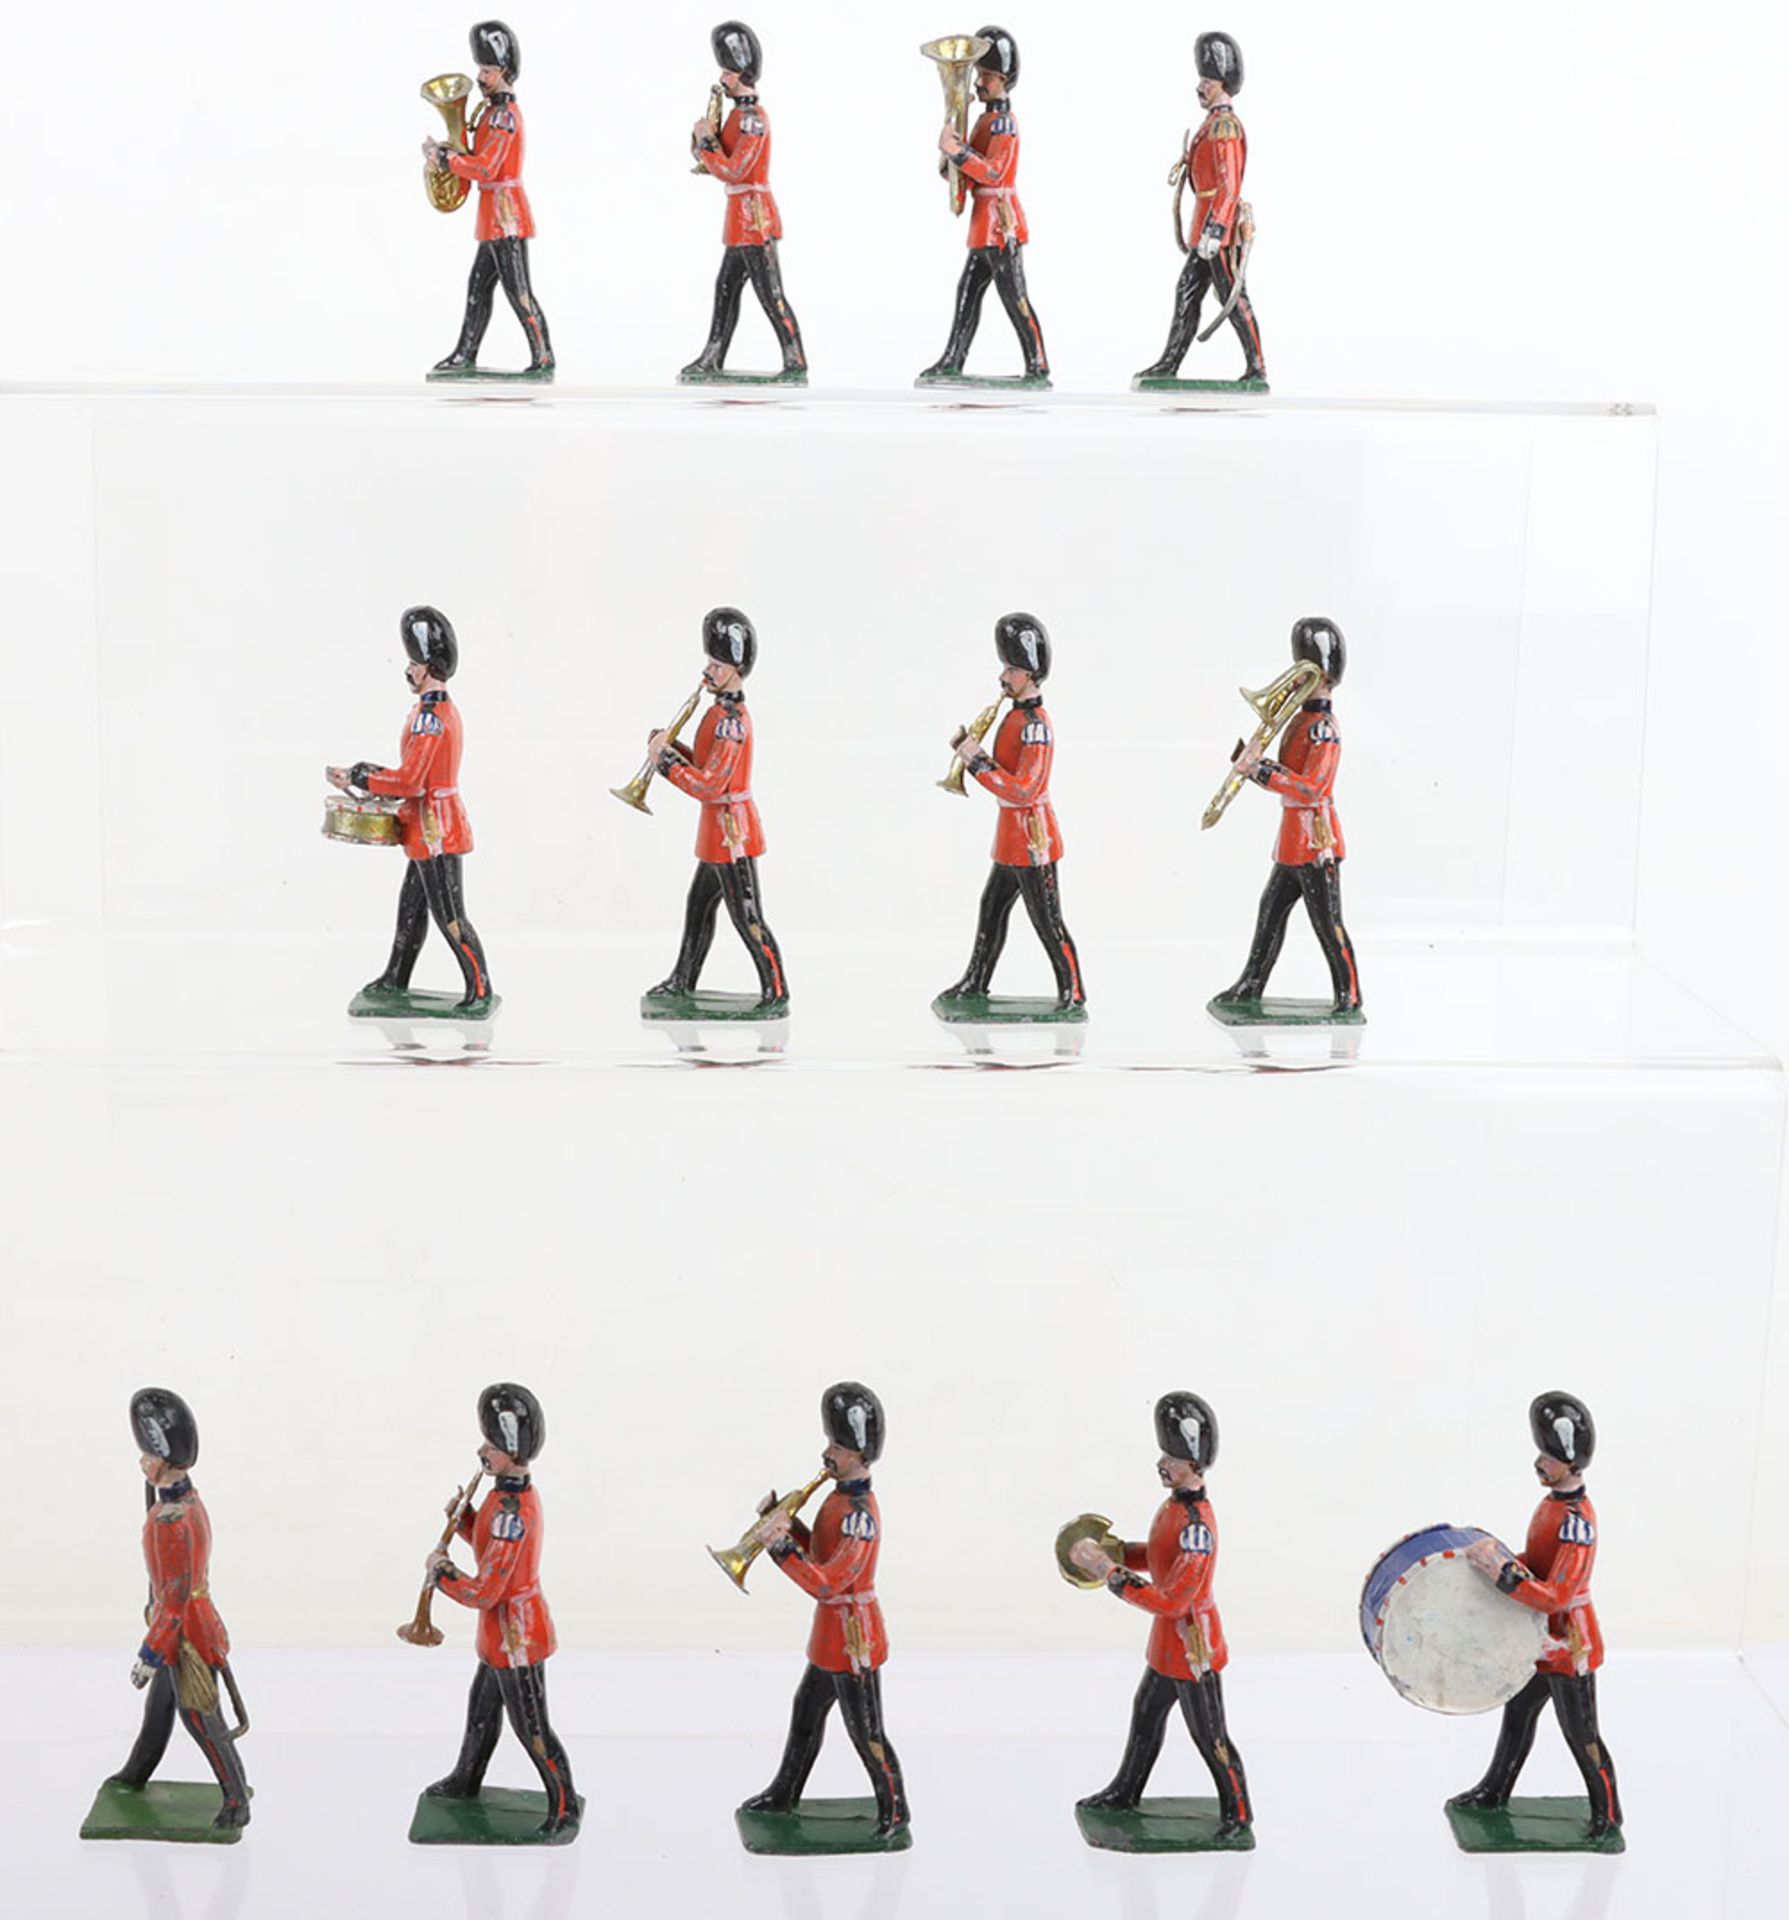 Band of the Grenadier Guards 60mm size - Image 2 of 4